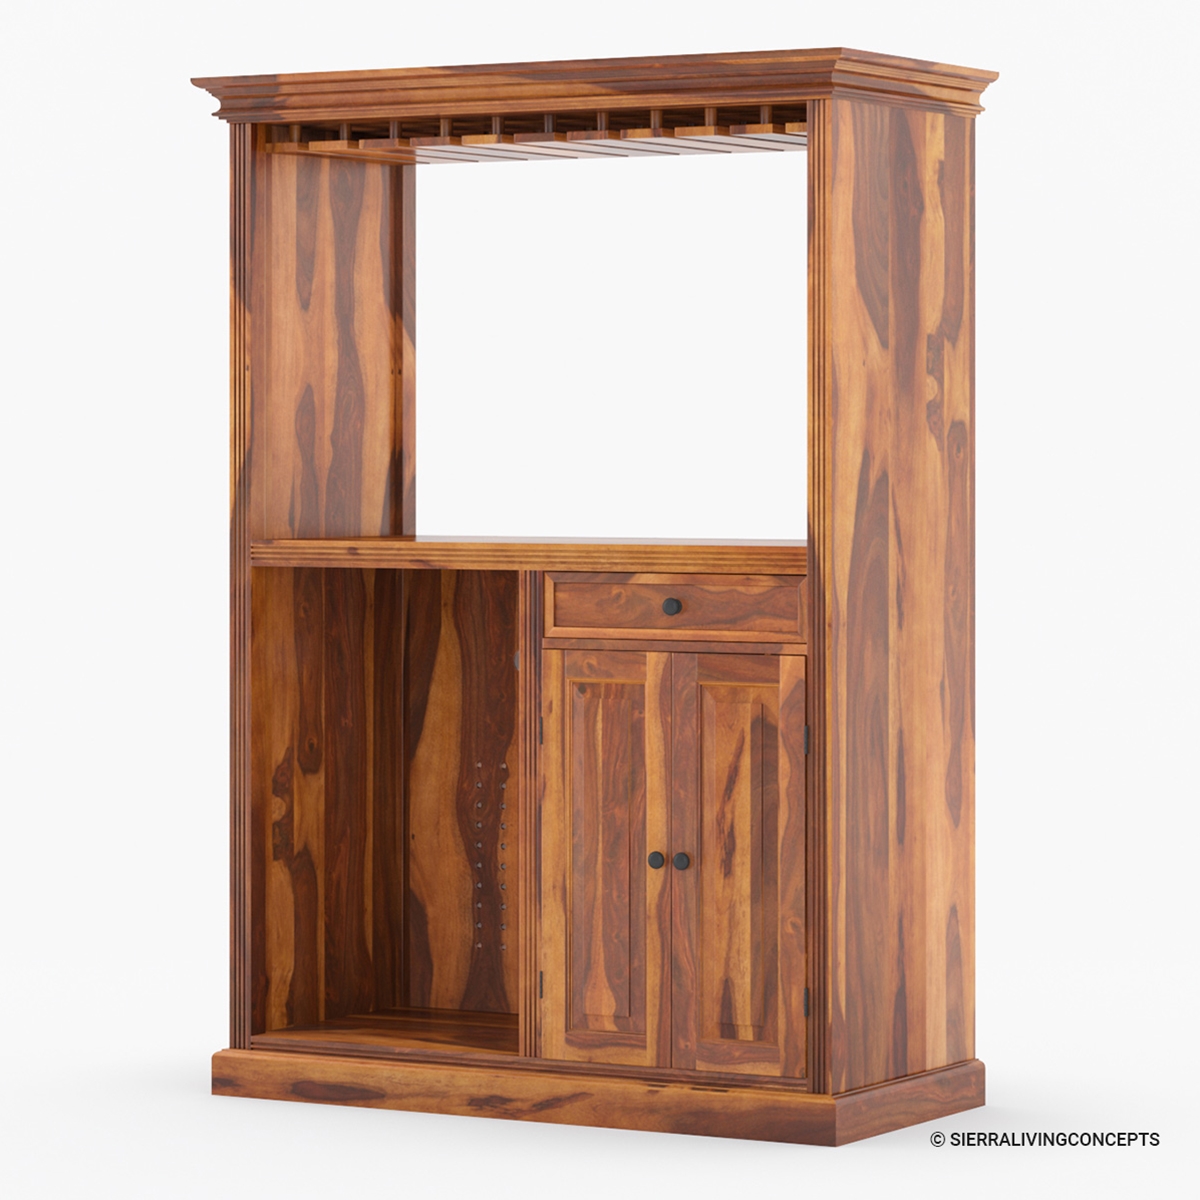 Houston Solid Wood Home Bar Cabinet With Fridge Space.